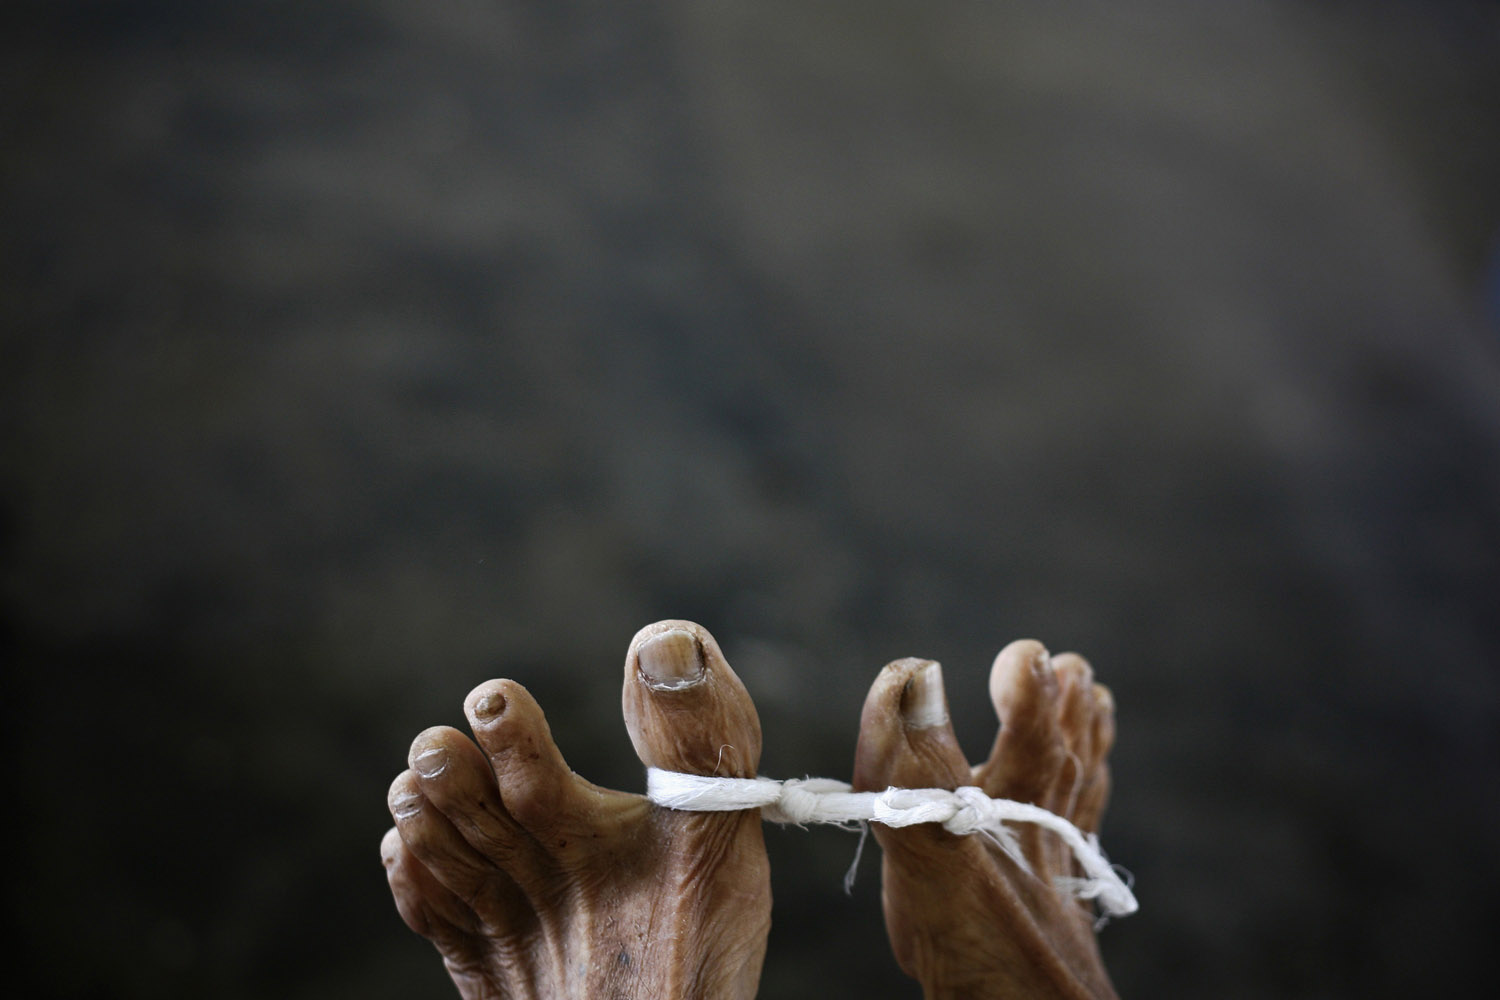 Feb. 23, 2013. The feet of U Ohn Myint, 60, who died of cancer, are tied with a piece of cloth as his body is placed inside the morgue in U Hla Tun Cancer Hospice on the outskirts of Yangon, Myanmar.